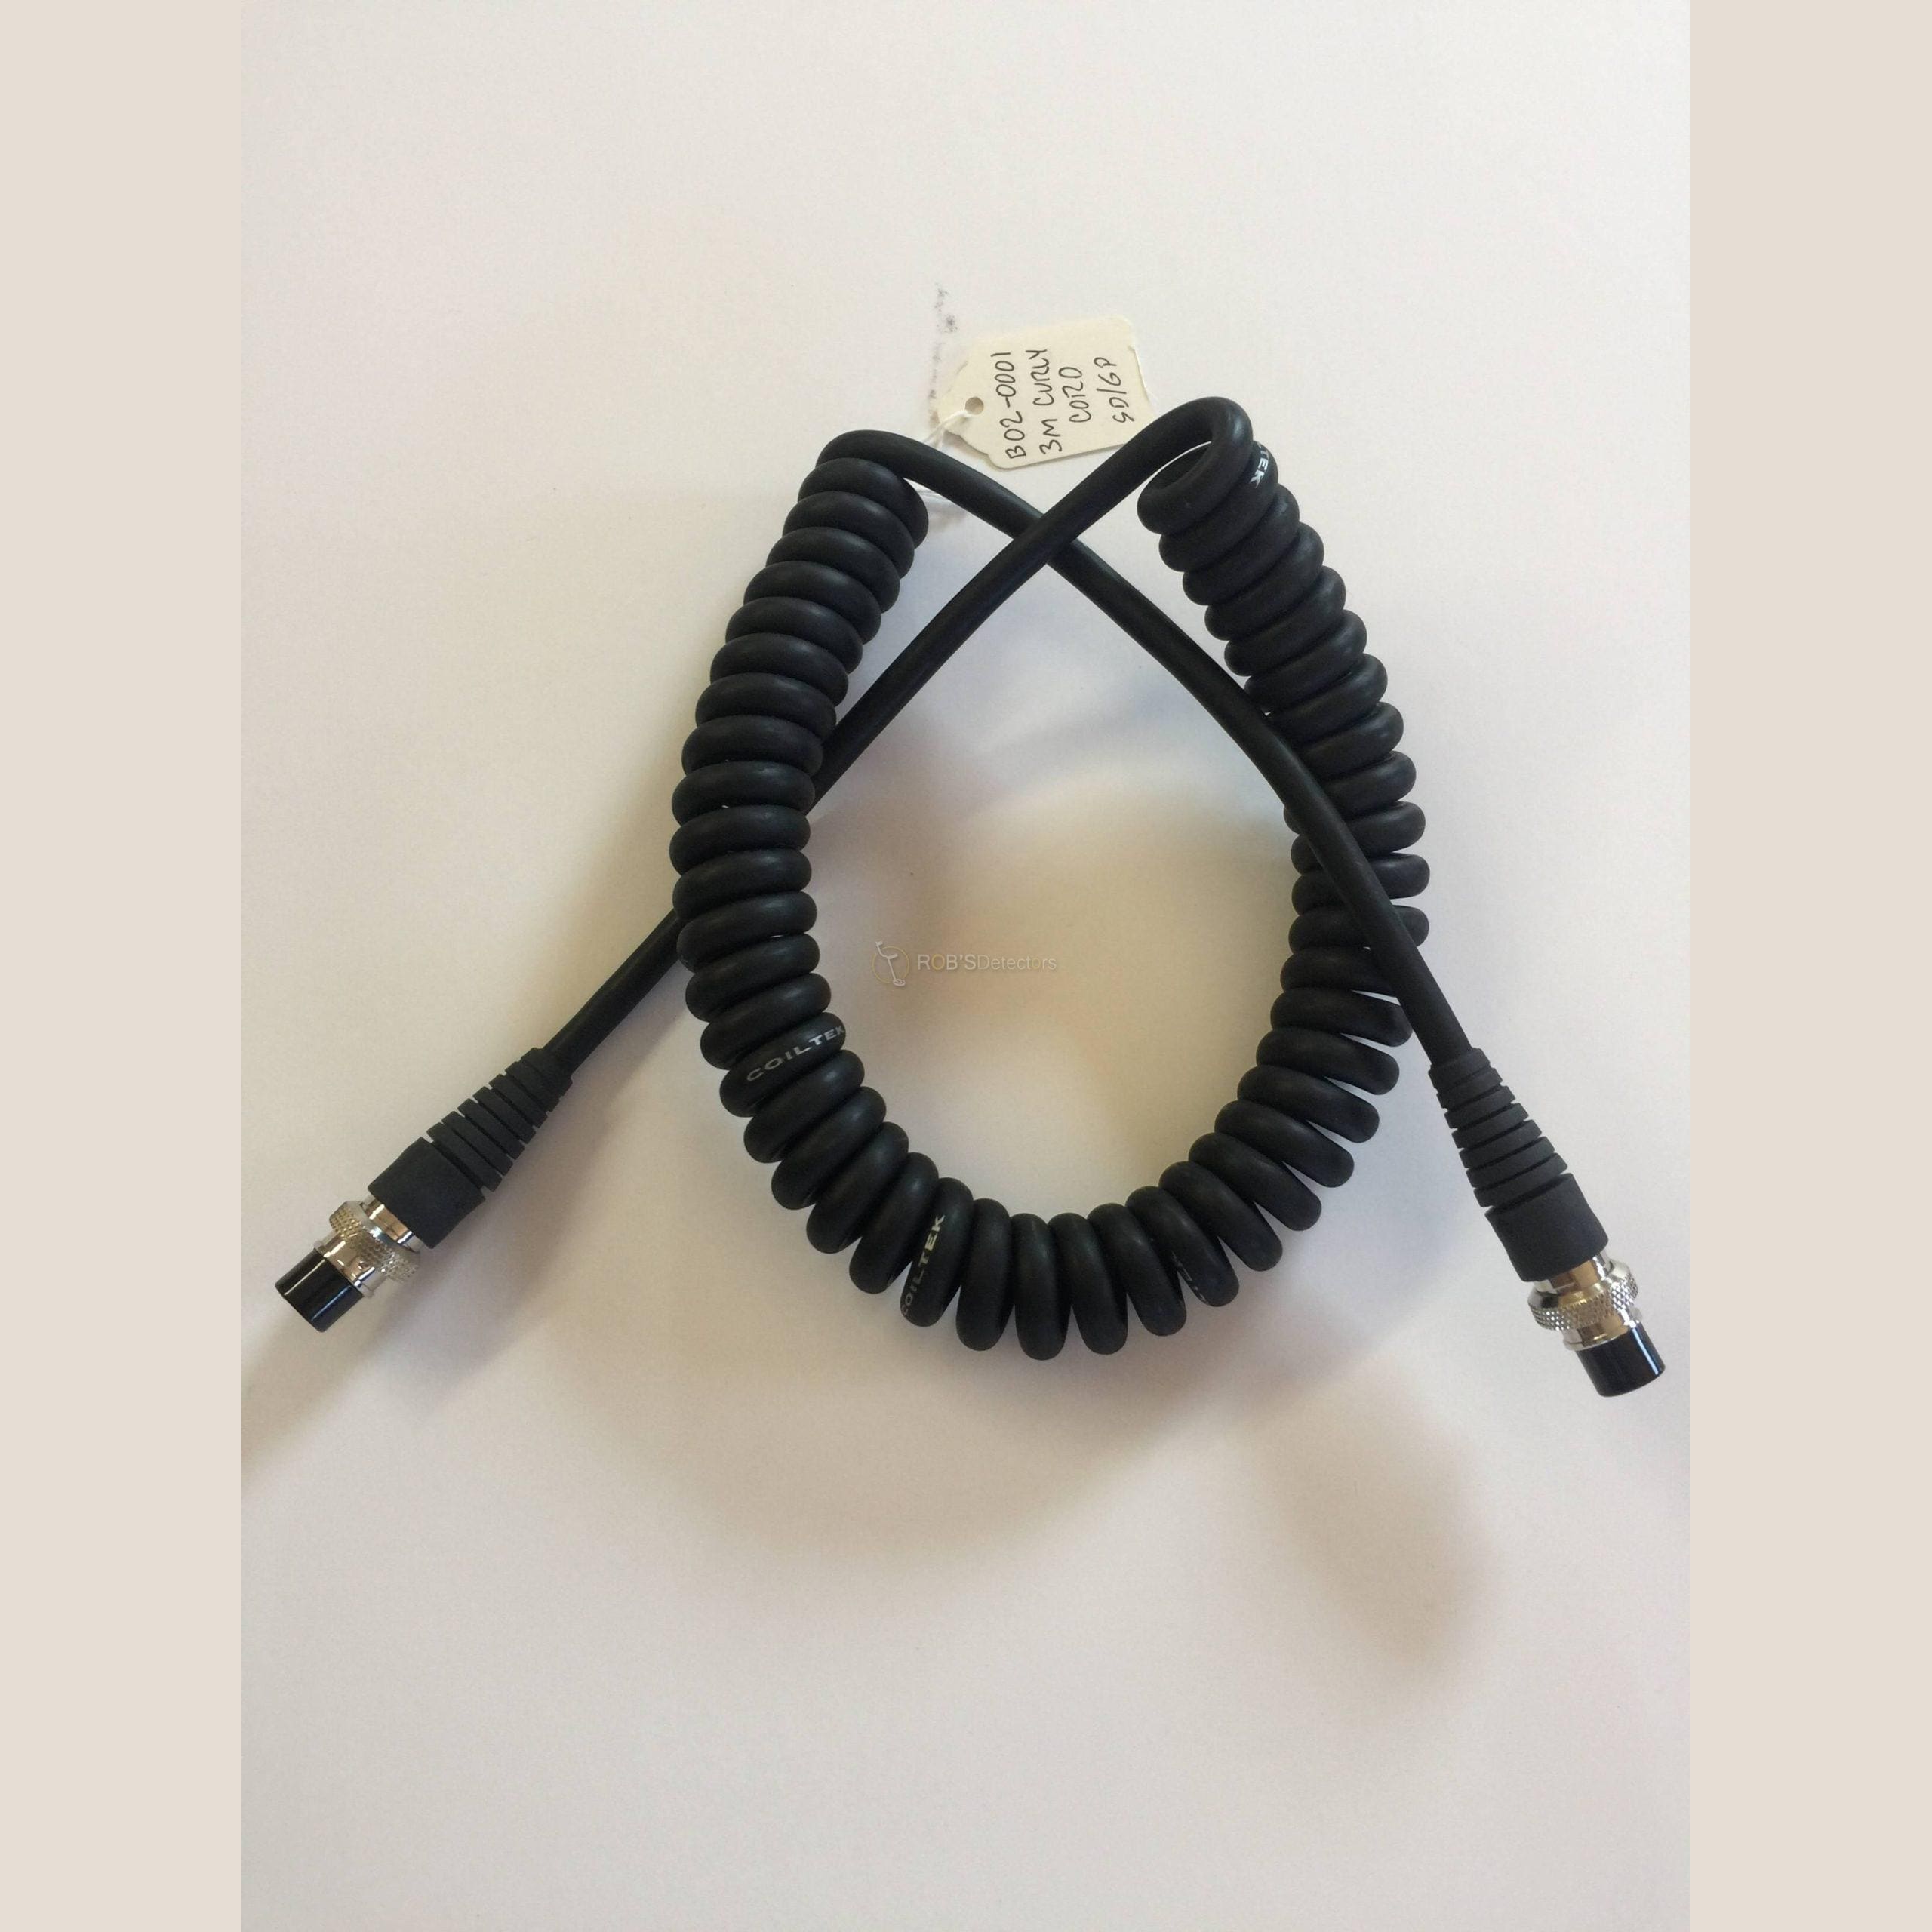 Coiltek 4-pin Heavy Duty Curly Power Cord for Minelab SD or GP series